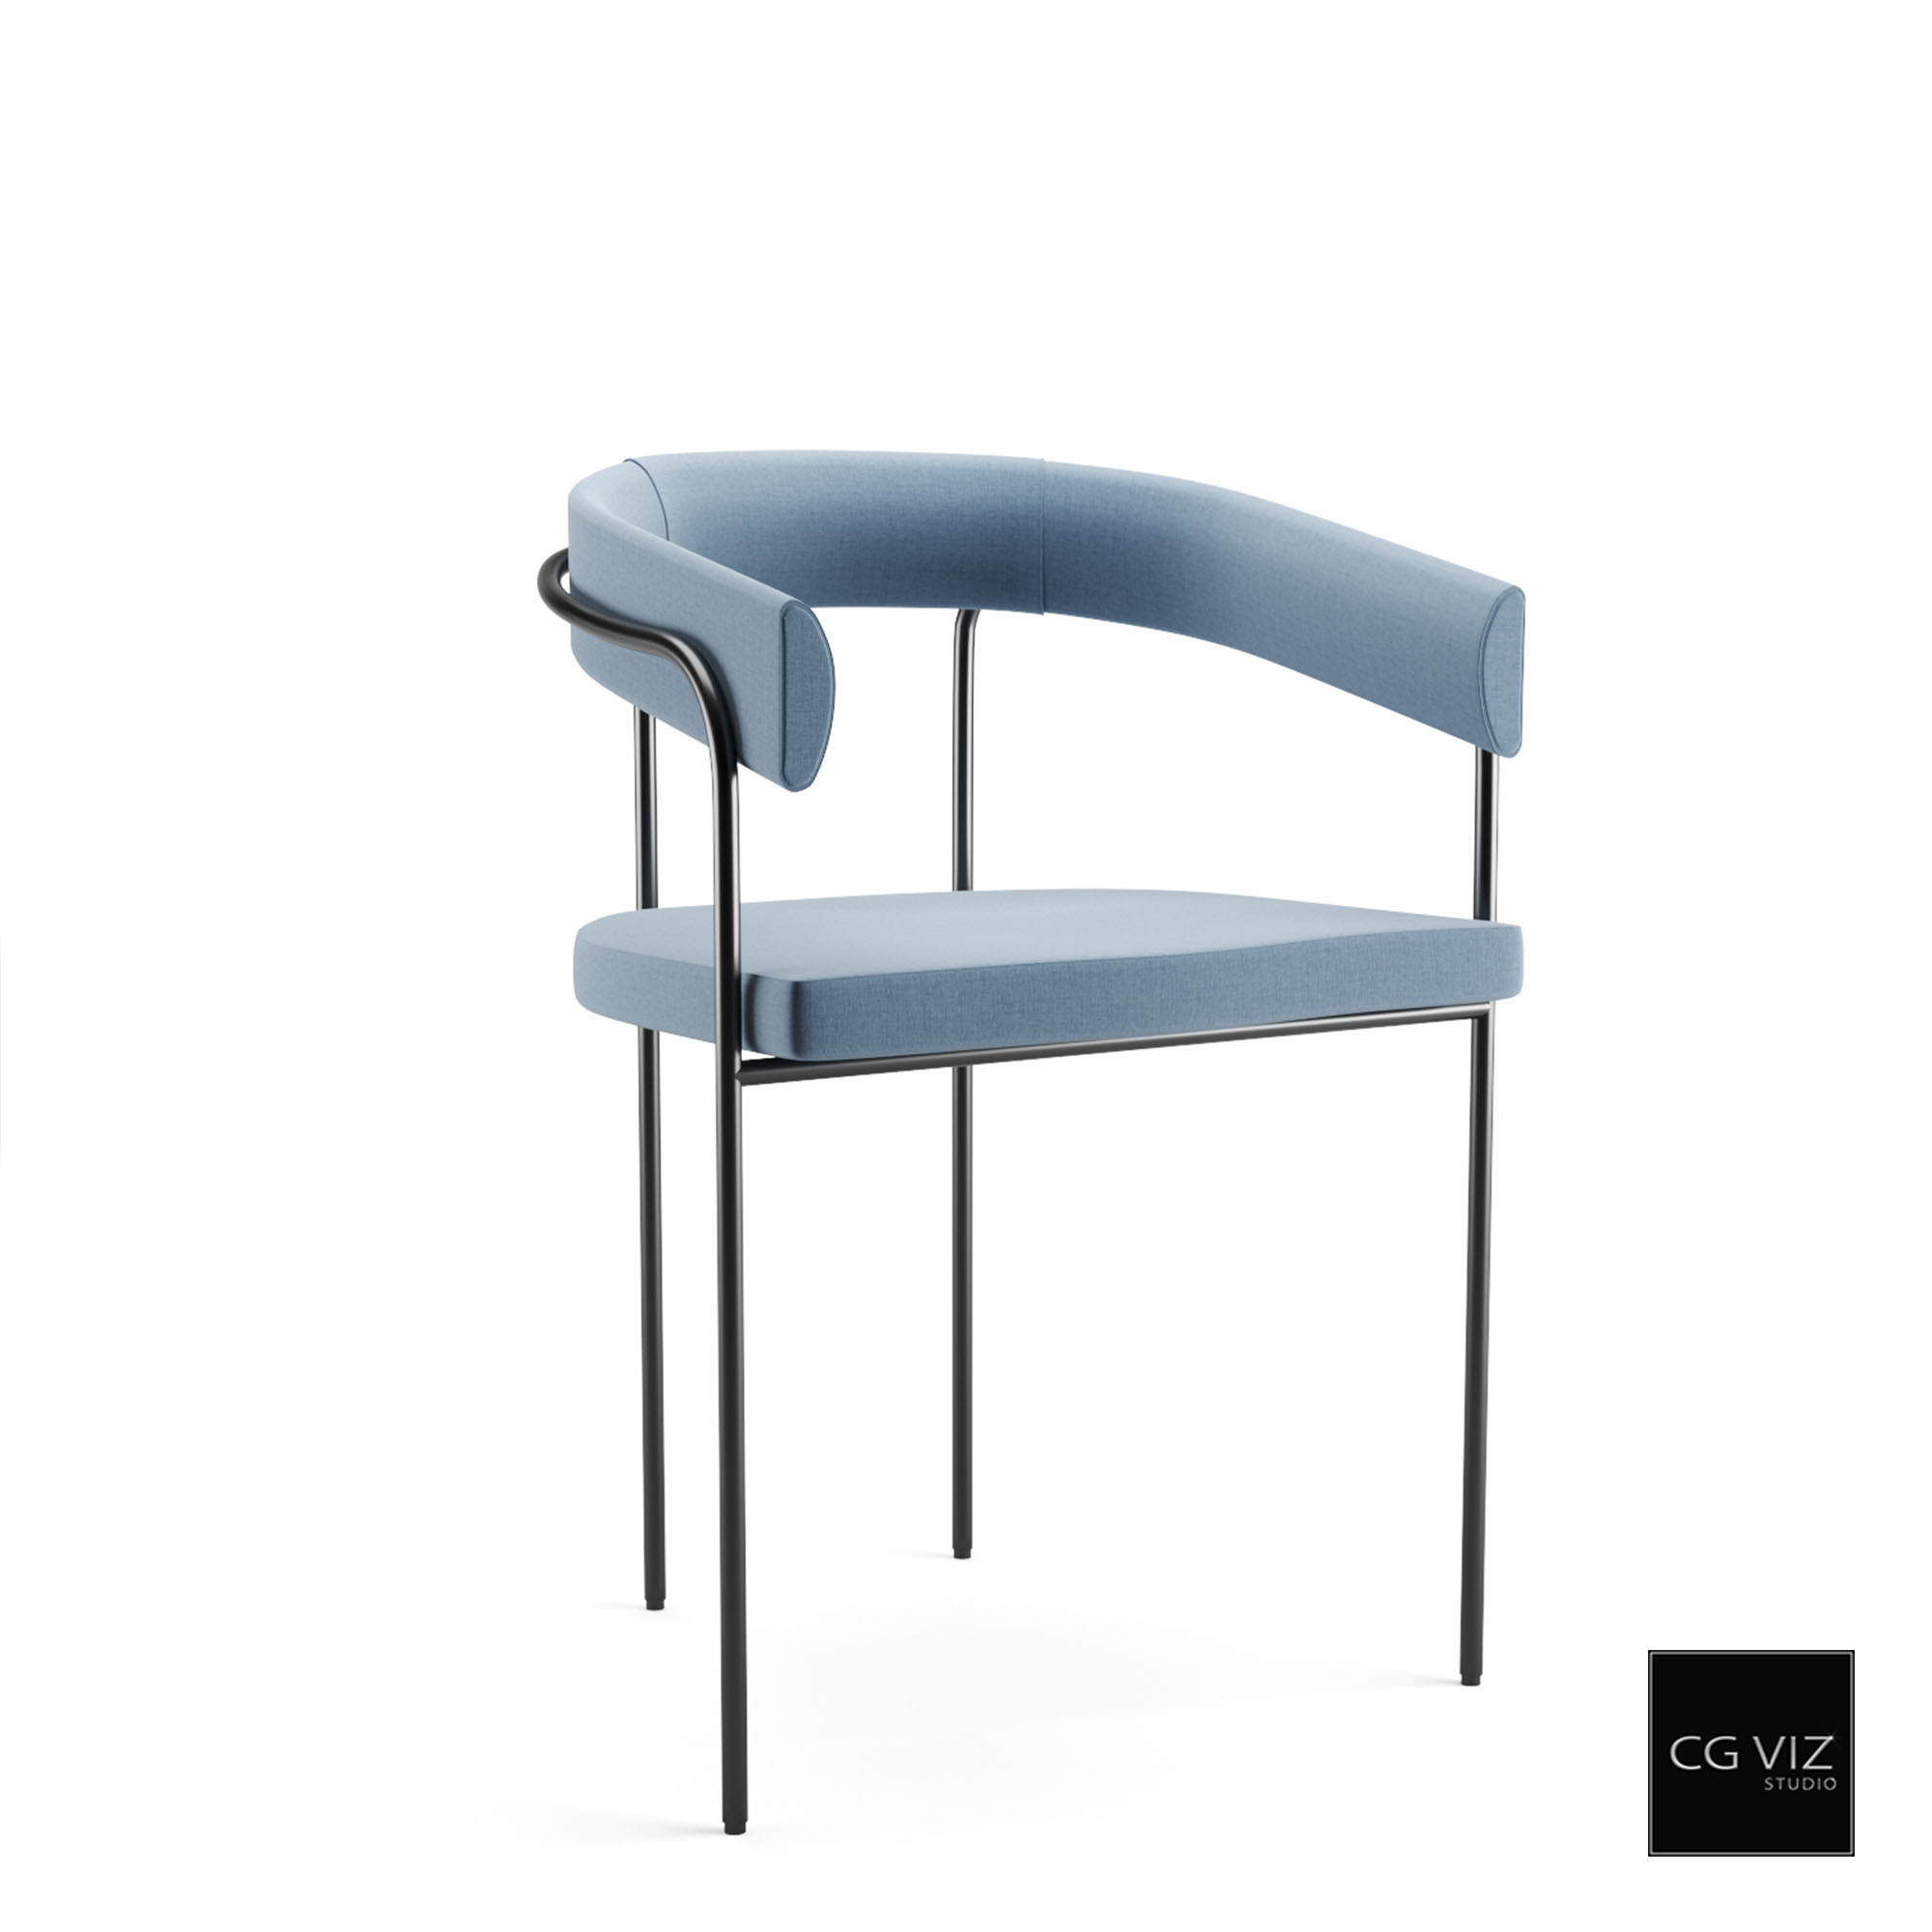 Rendered Preview of Baxter C Chair 3D Model by CG Viz Studio